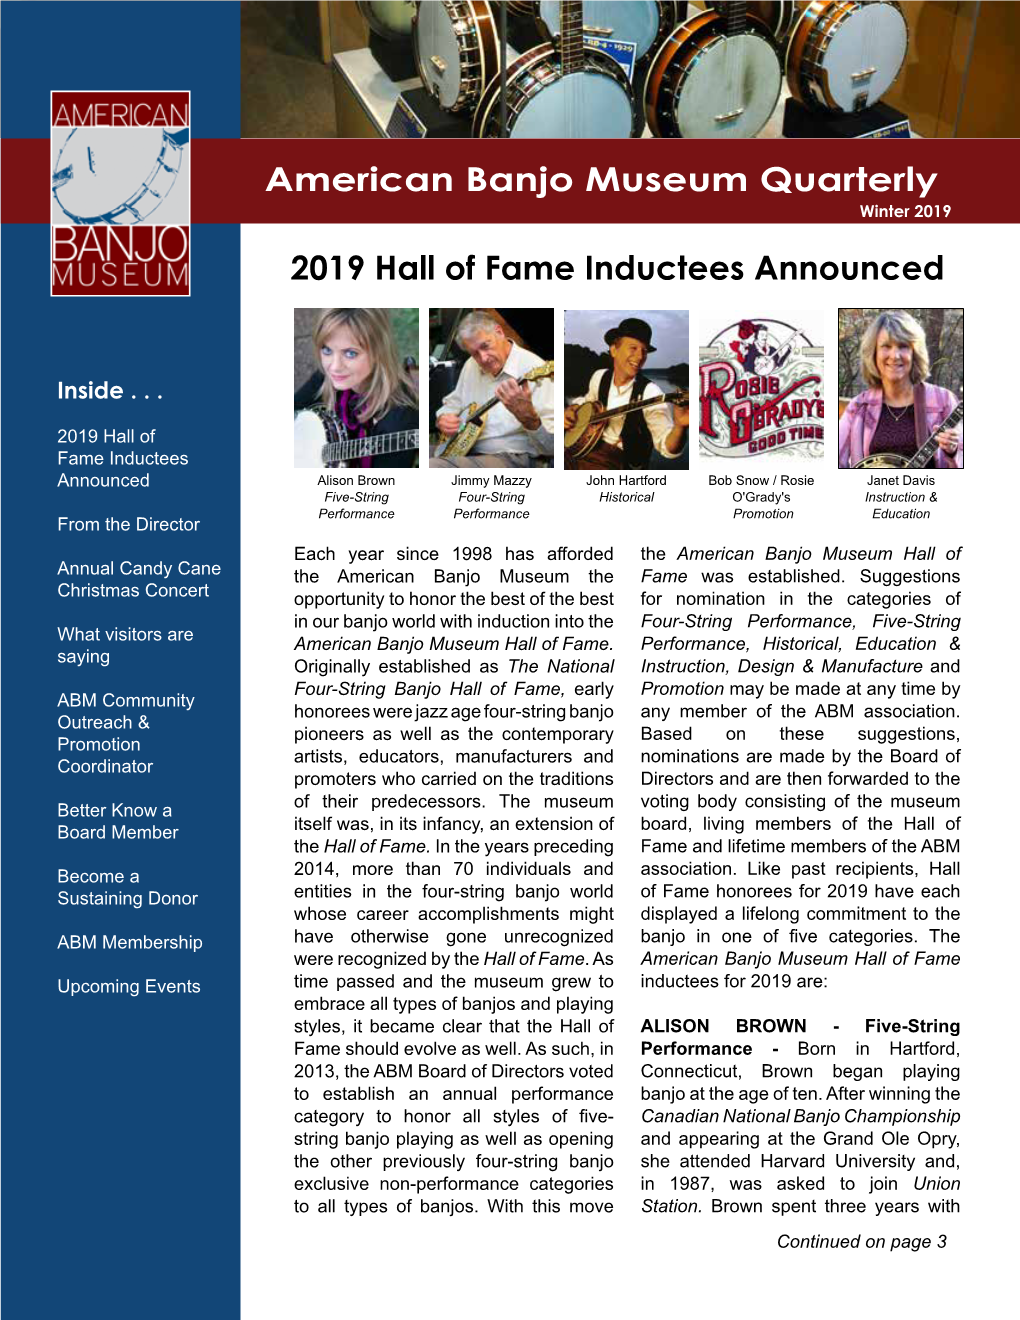 American Banjo Museum Quarterly 2019 Hall of Fame Inductees Announced